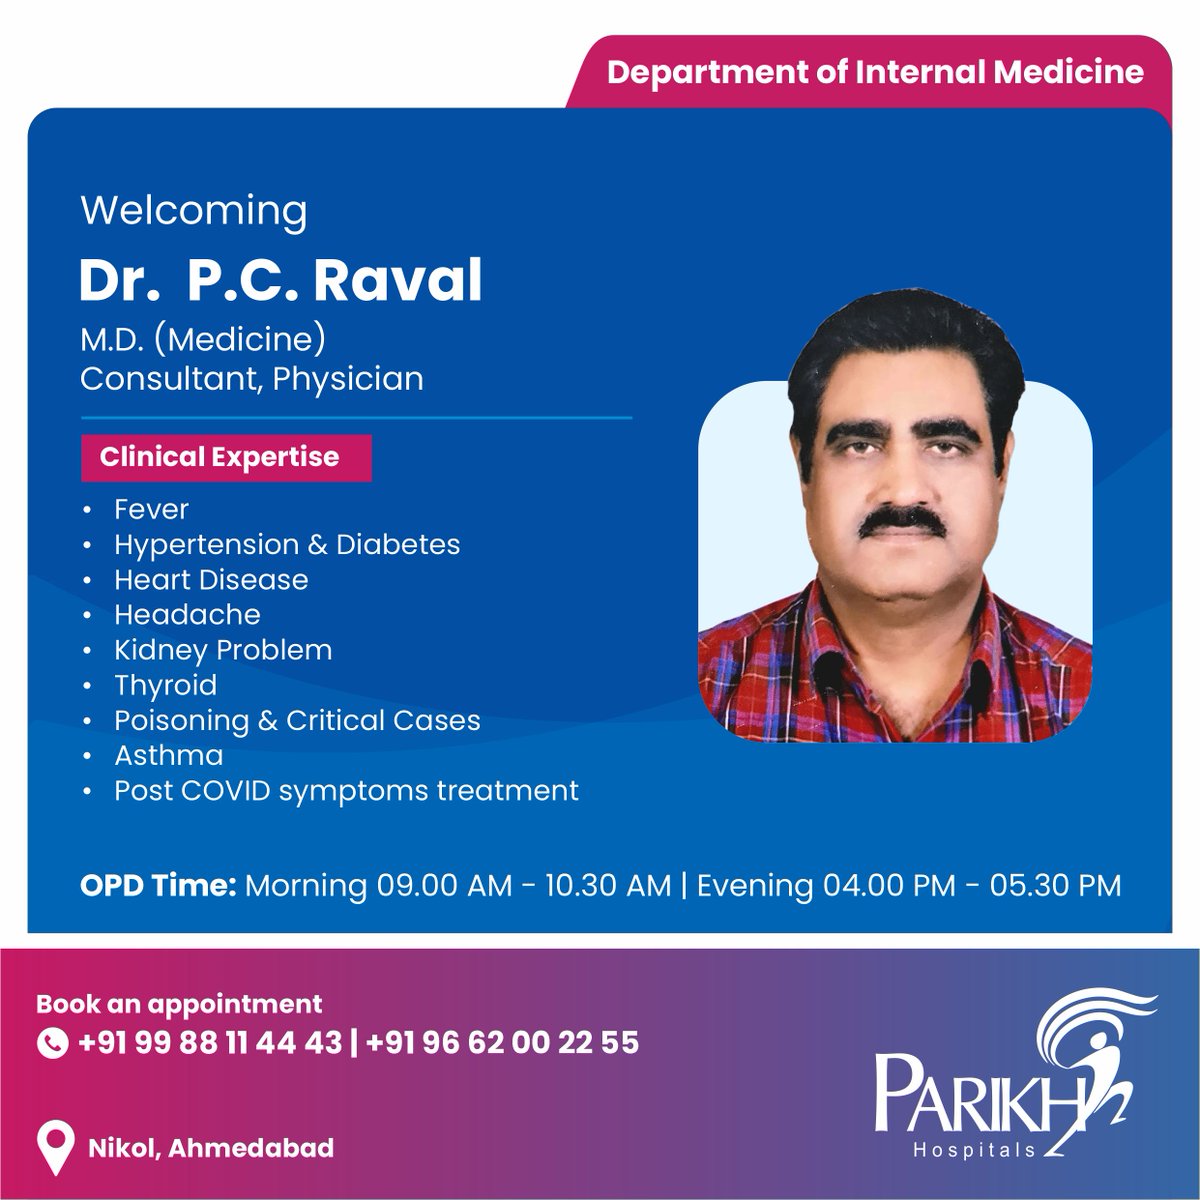 Meet Dr. P.C. Raval - a highly trained Specialist Senior Physician at Parikh Hospital, Nikol, Ahmedabad. To book an appointment, call 99 88 11 44 43 | 99 88 11 44 45 #ParikhHospital #nikol #ent #HealthCare #hospital #bestdoctor #fever #hypertension #diabetes #thyroid #physician